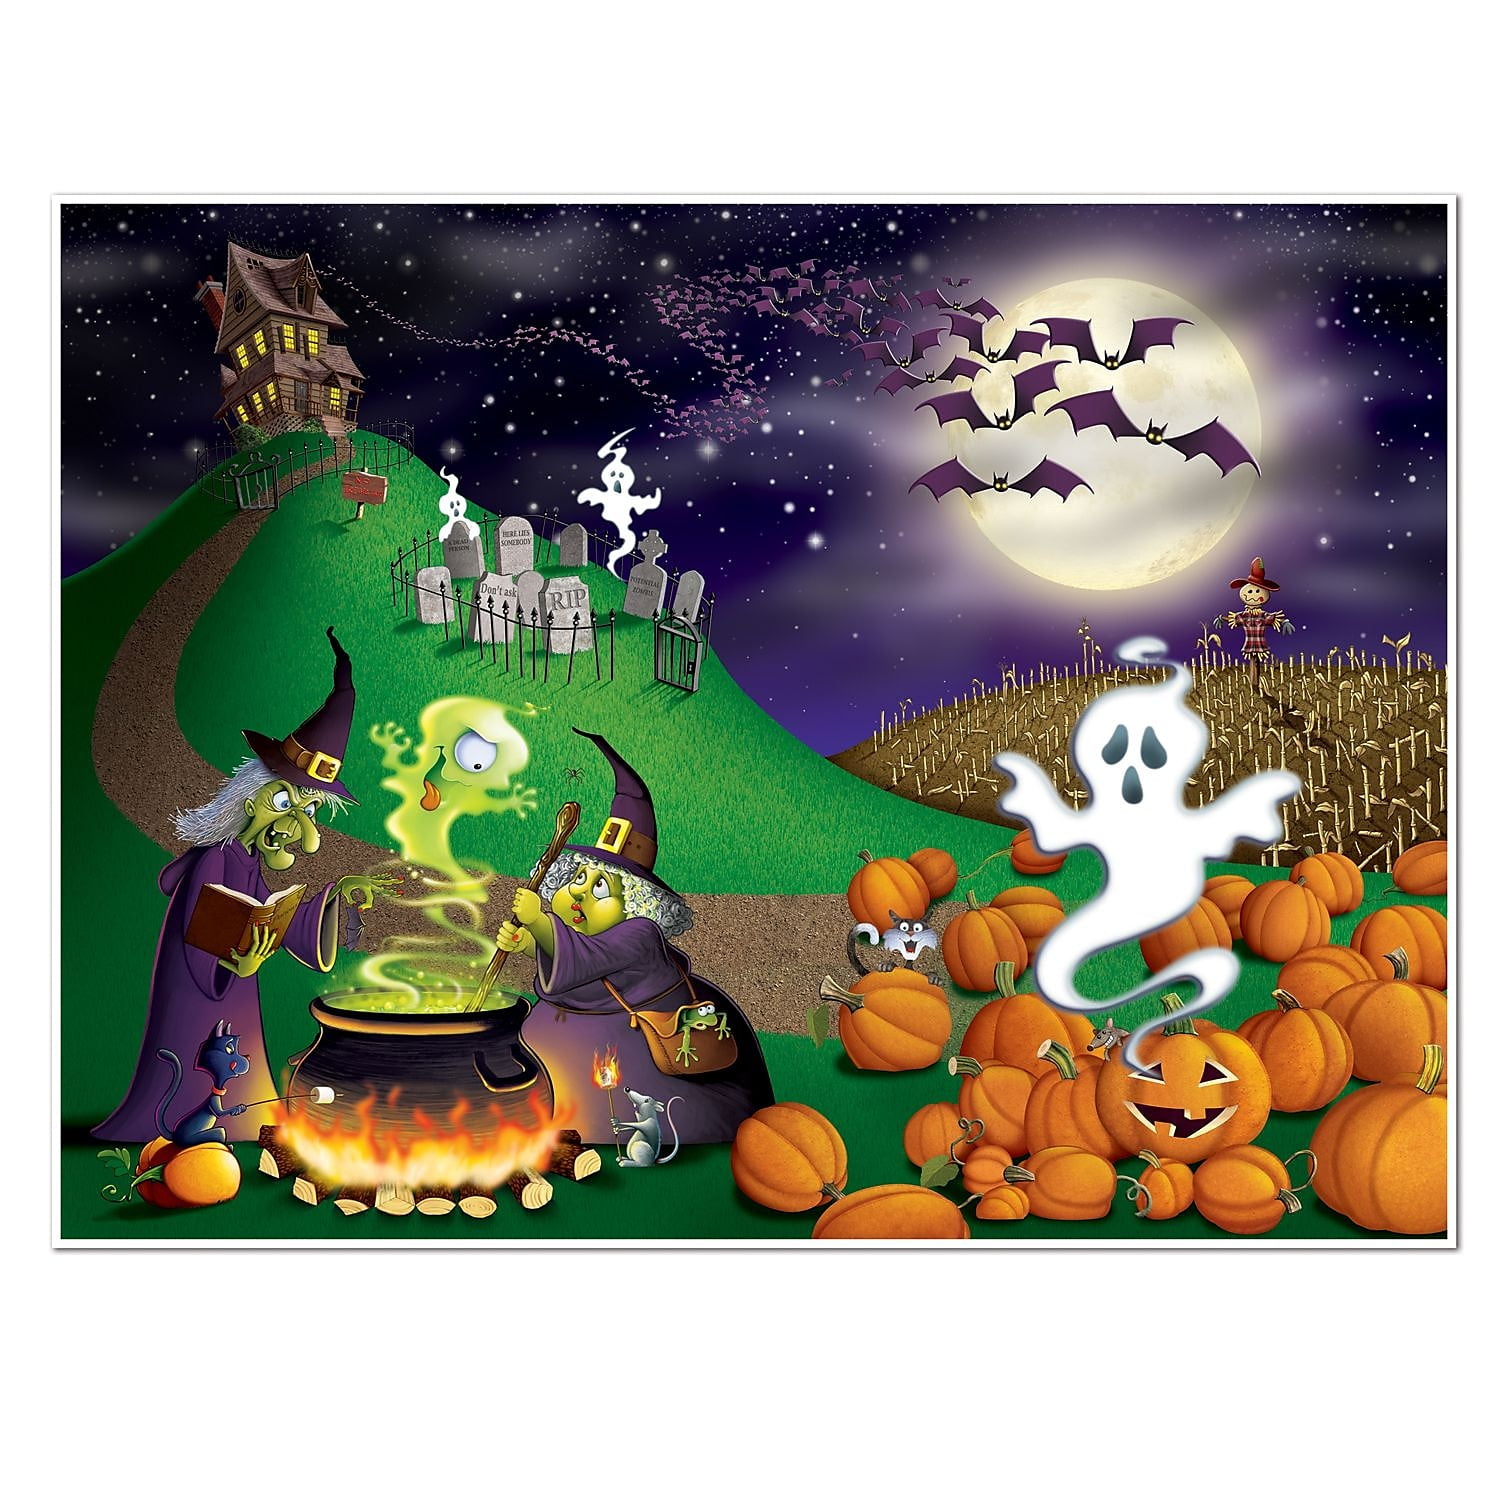 Halloween Spooky Wall Projector Wall Decoration Party Project Images Bag Filler 